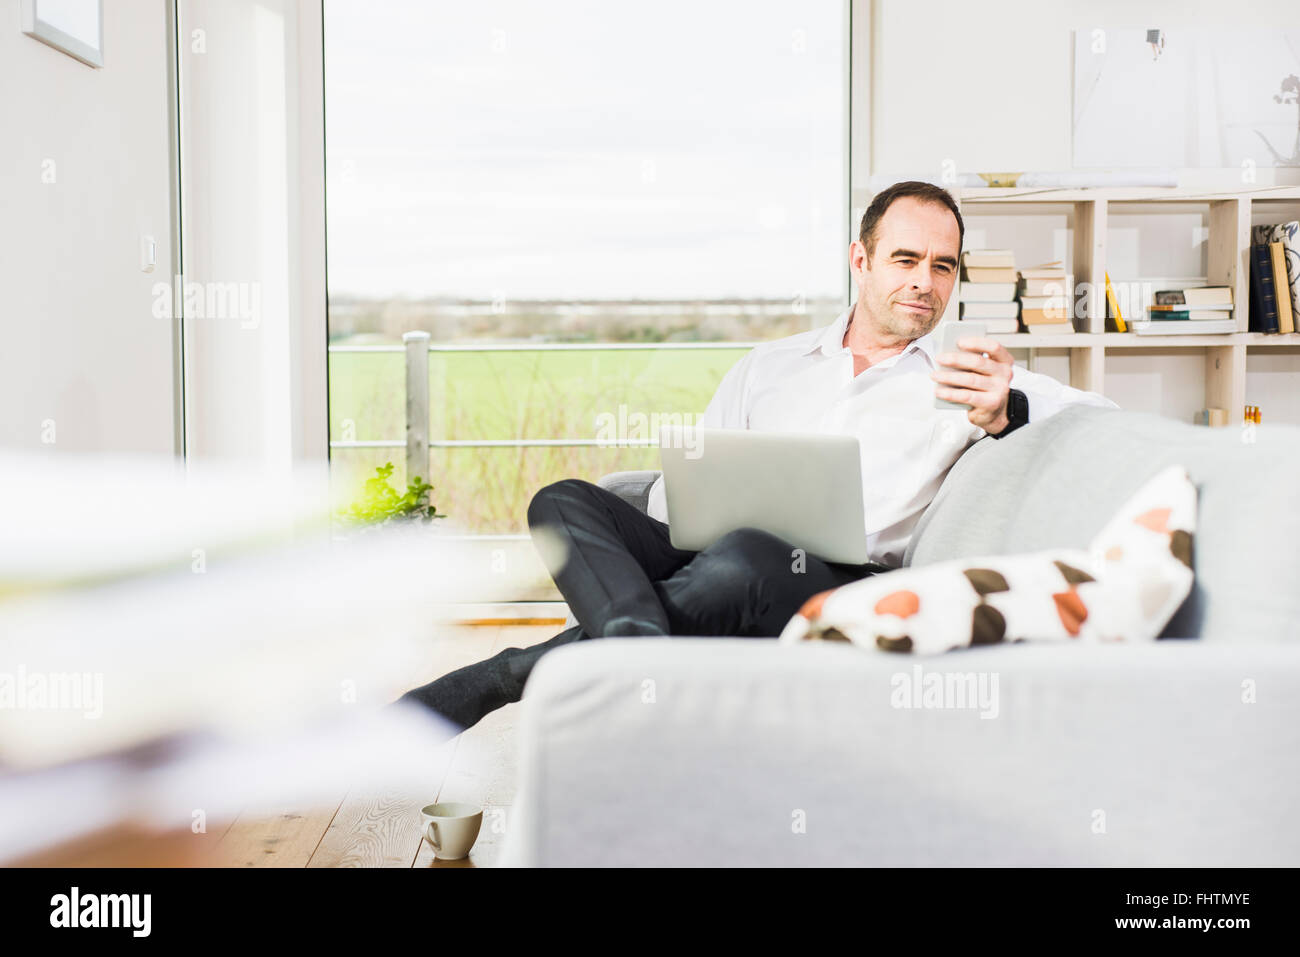 Businessman on couch using laptop and cell phone Stock Photo